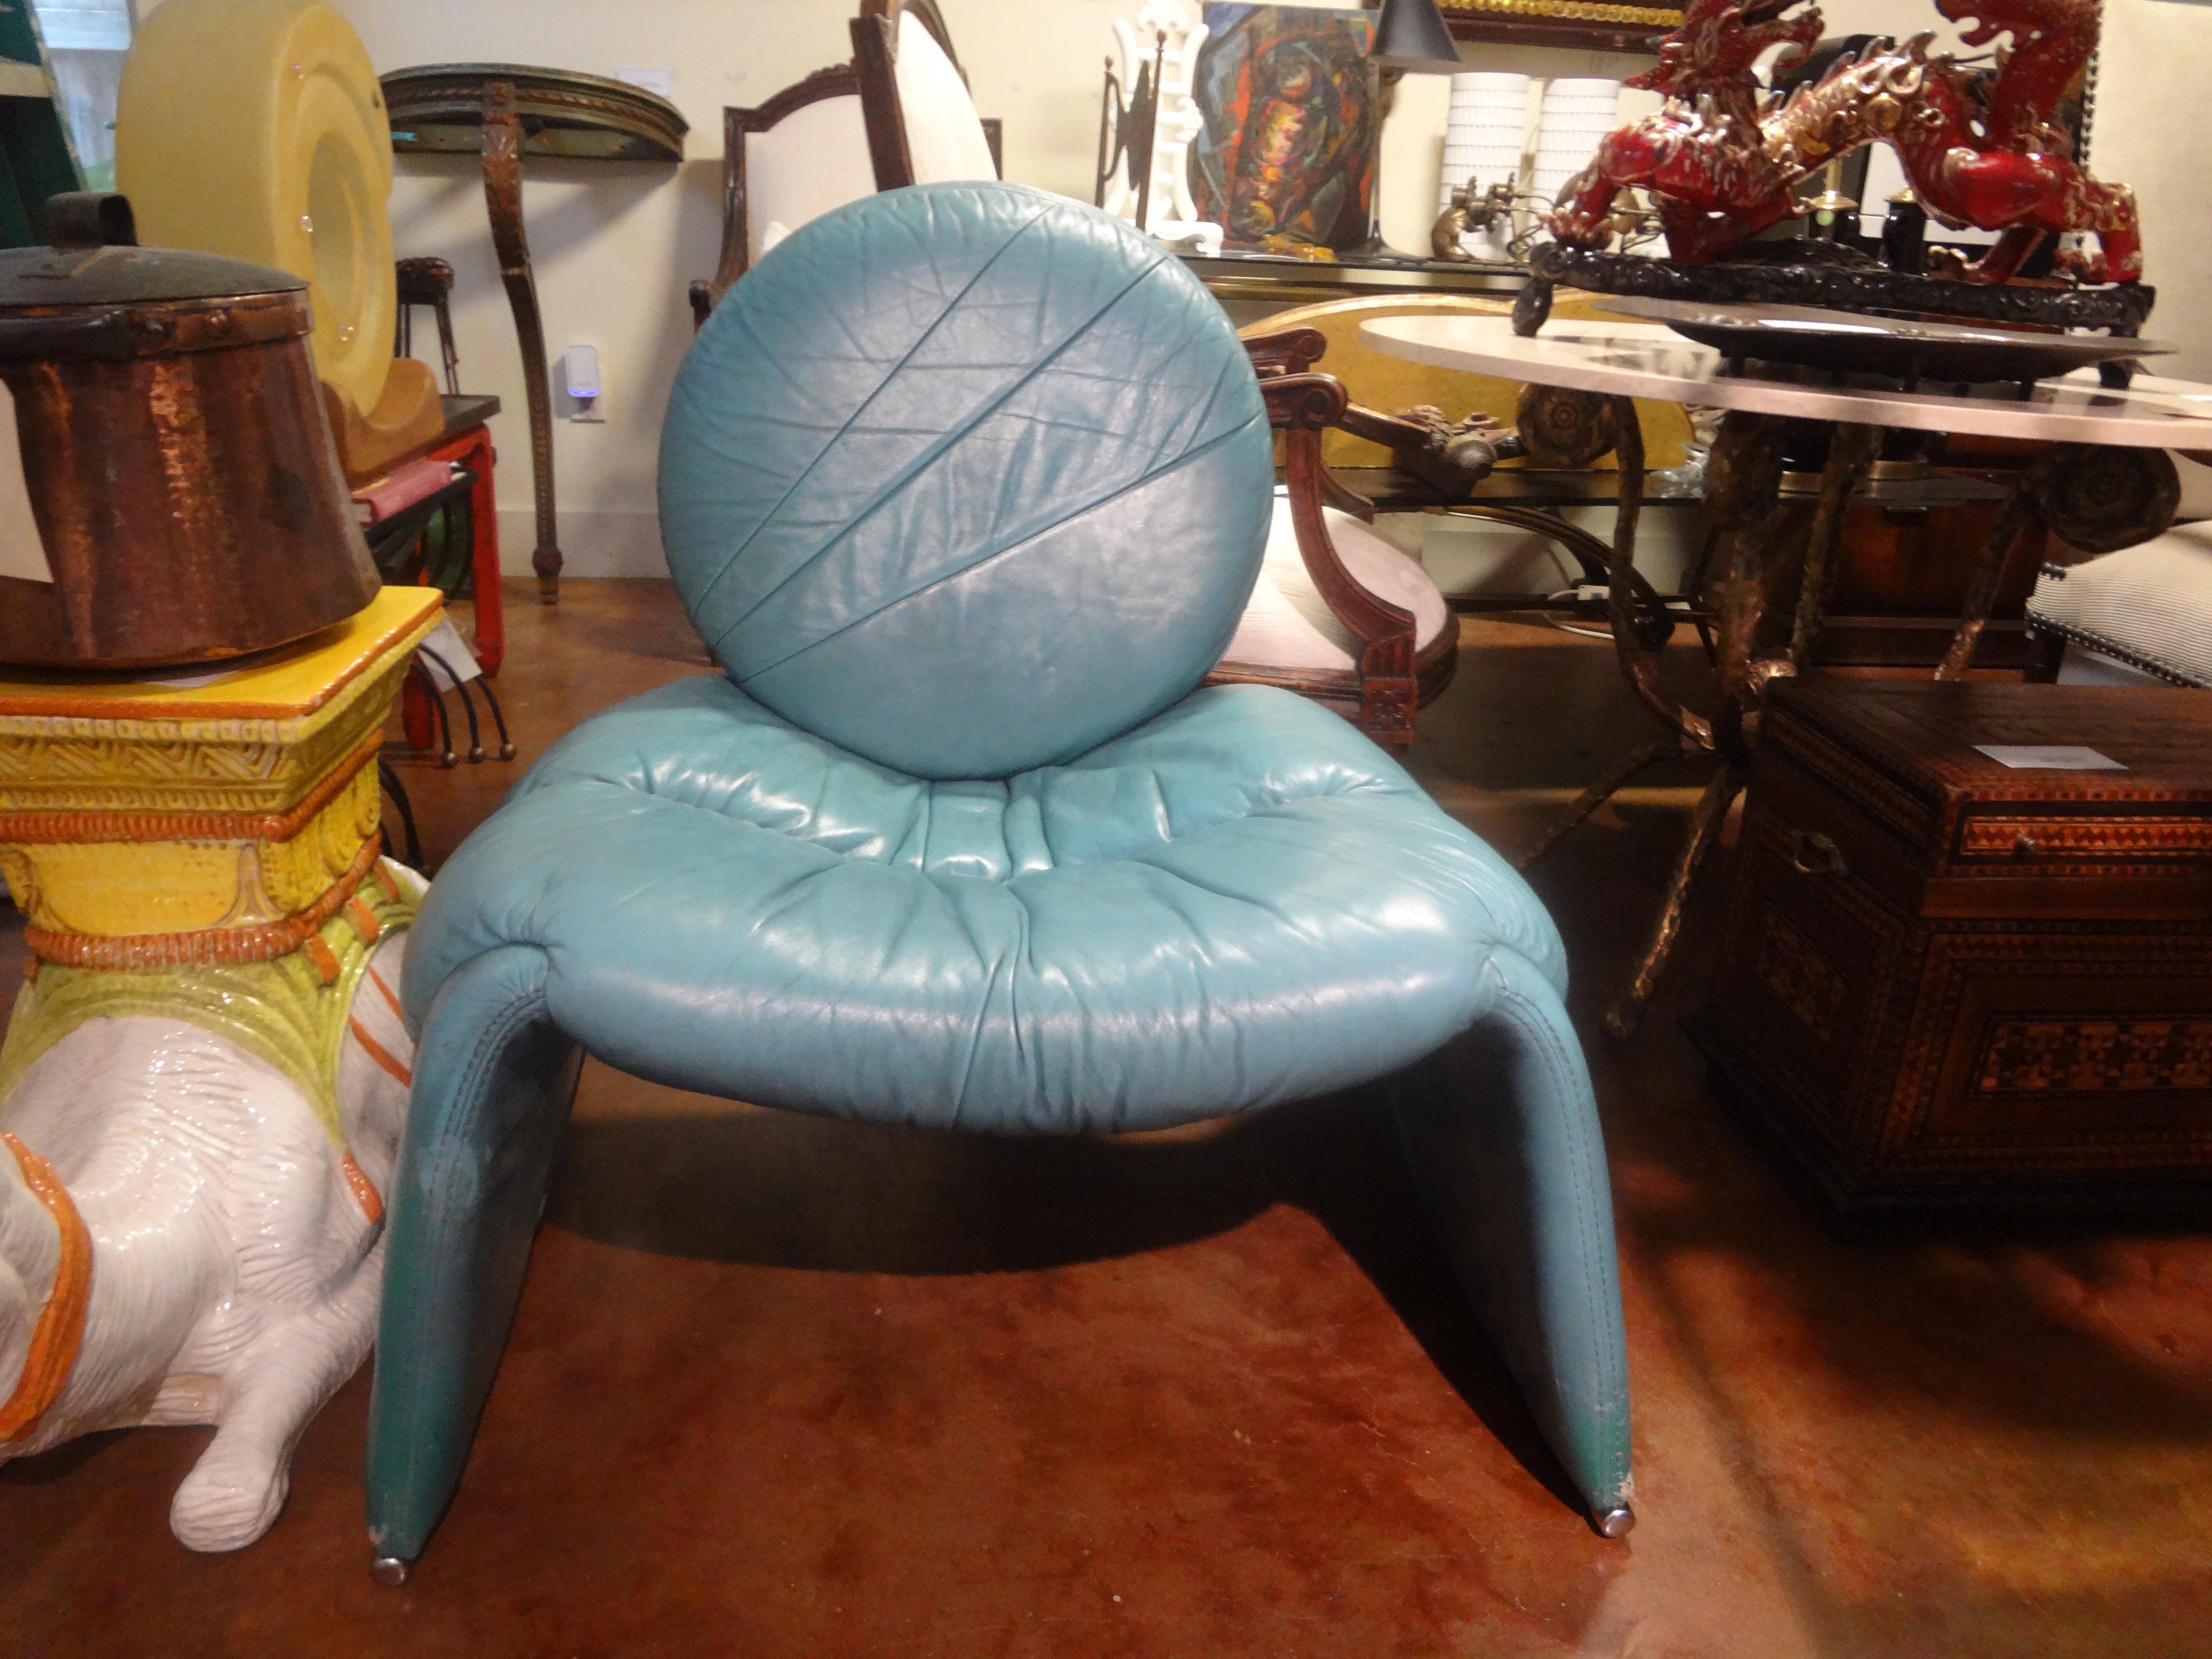 Italian Post Modern leather chair by Vittorio Introini For Saporiti Italia 1970. This stunning Italian modern lounge chair or side chair with chrome supports is upholstered in its original light turquoise leather. Extremely comfortable with an